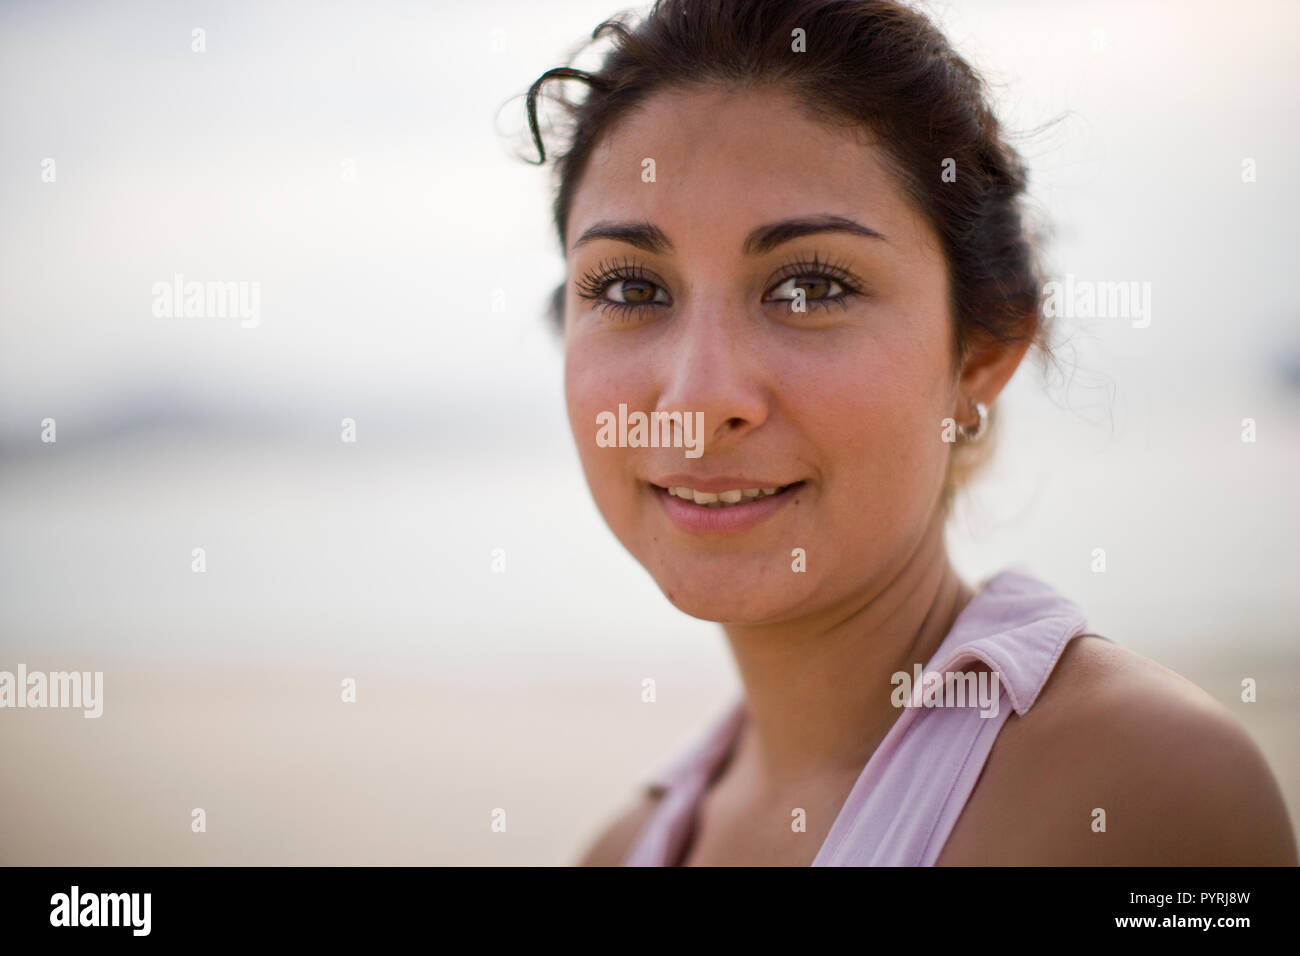 Portrait of young woman wearing pink top Stock Photo